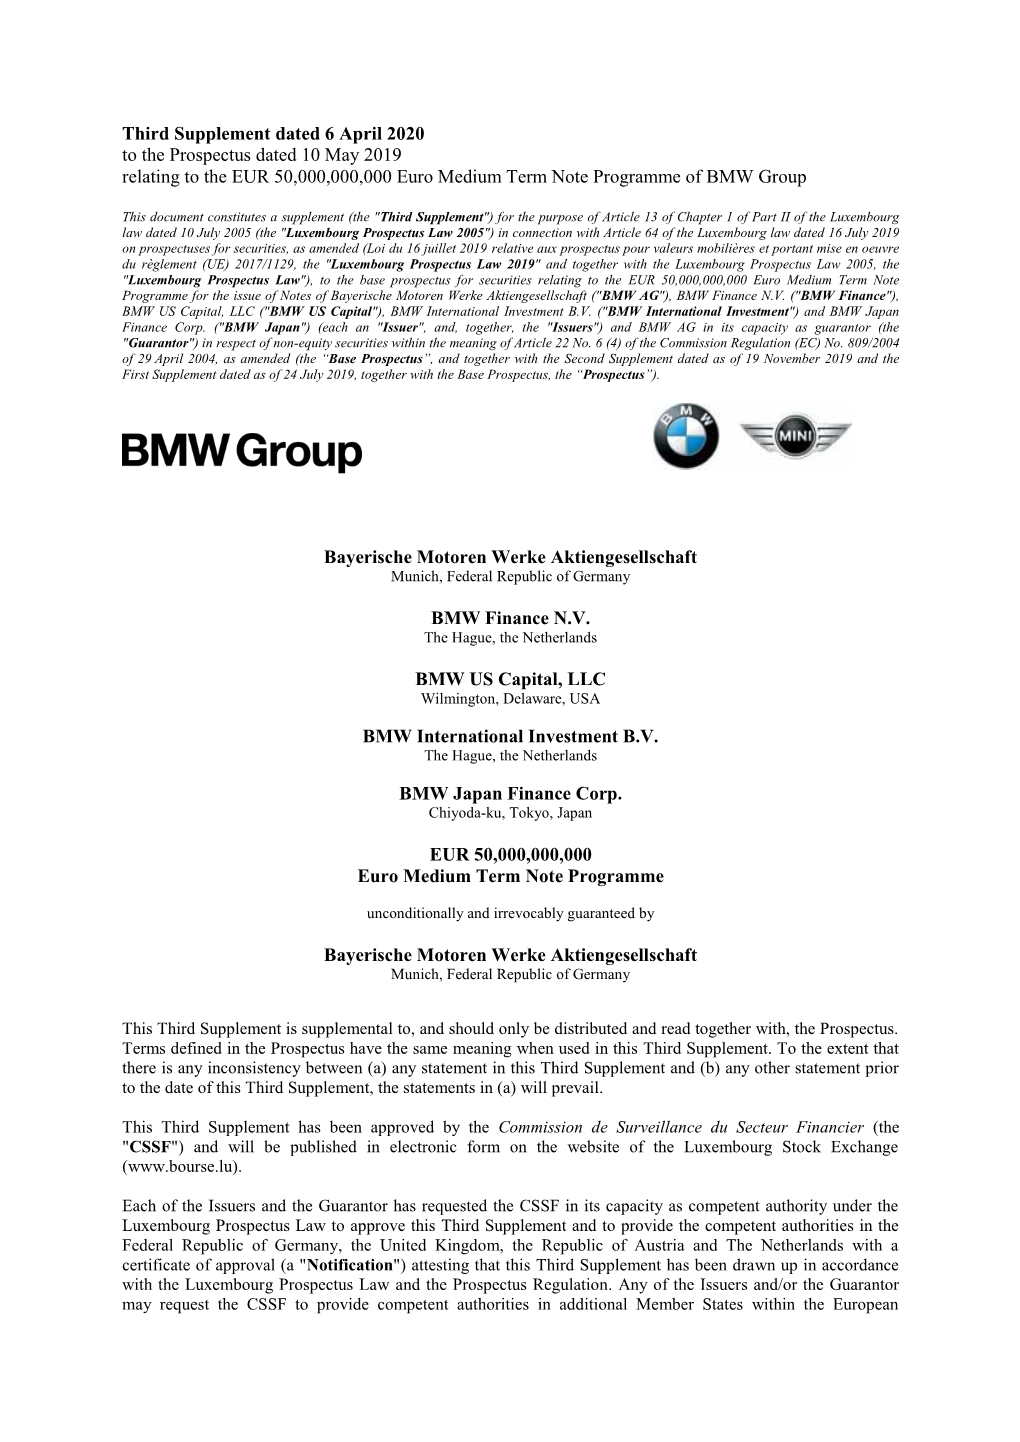 Third Supplement Dated 6 April 2020 to the Prospectus Dated 10 May 2019 Relating to the EUR 50,000,000,000 Euro Medium Term Note Programme of BMW Group